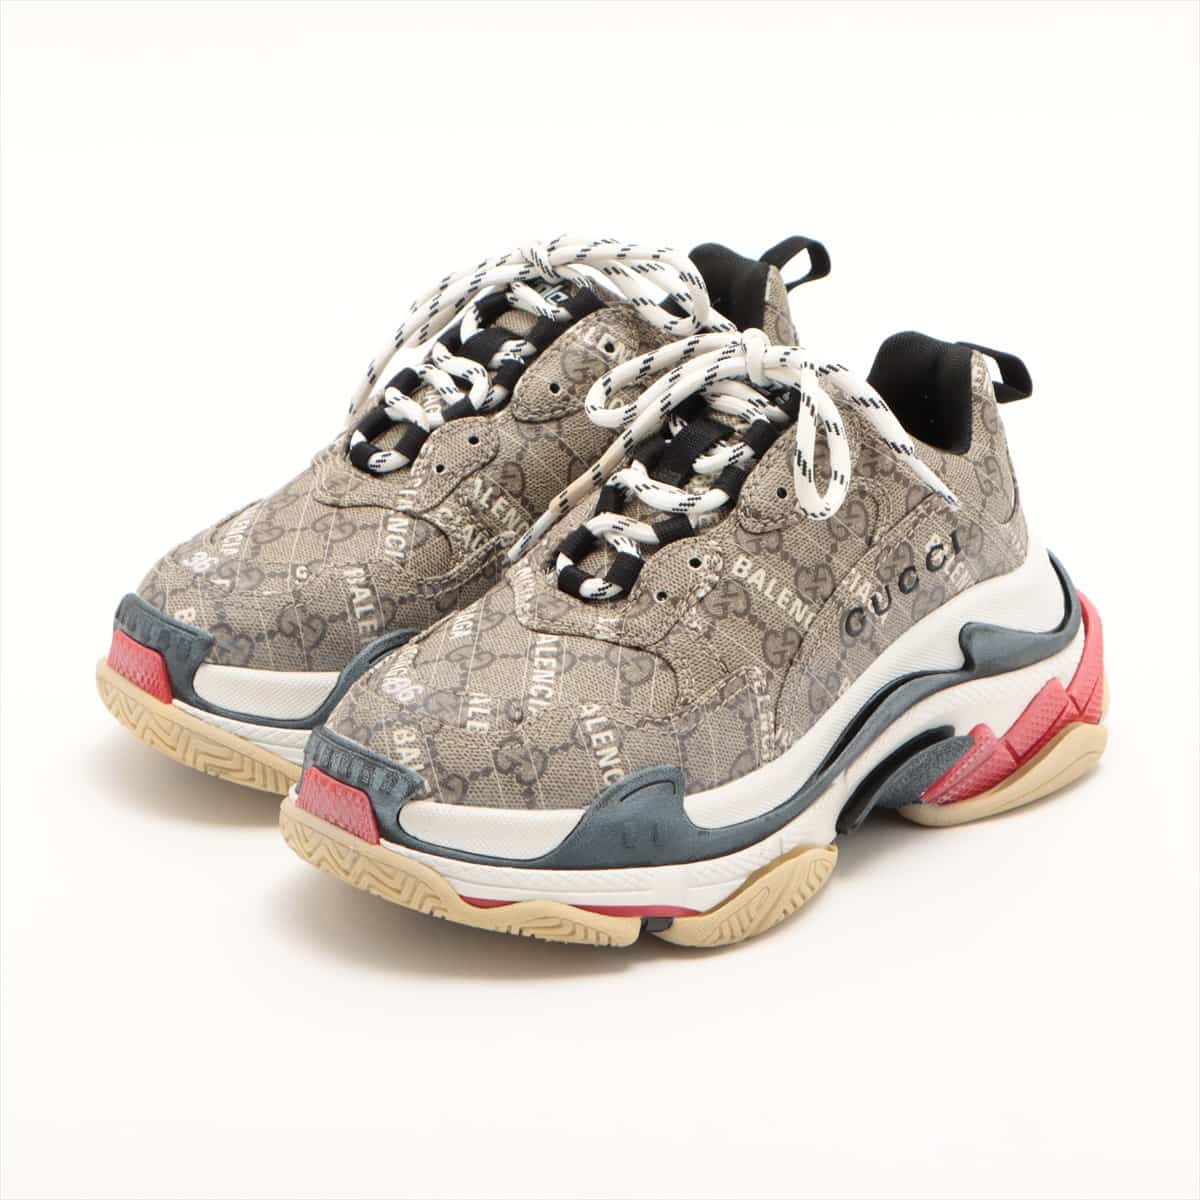 Gucci x Balenciaga Triple s 21 years Fabric Sneakers 24cm Ladies' Beige 677192 GG Supreme The hackers projects